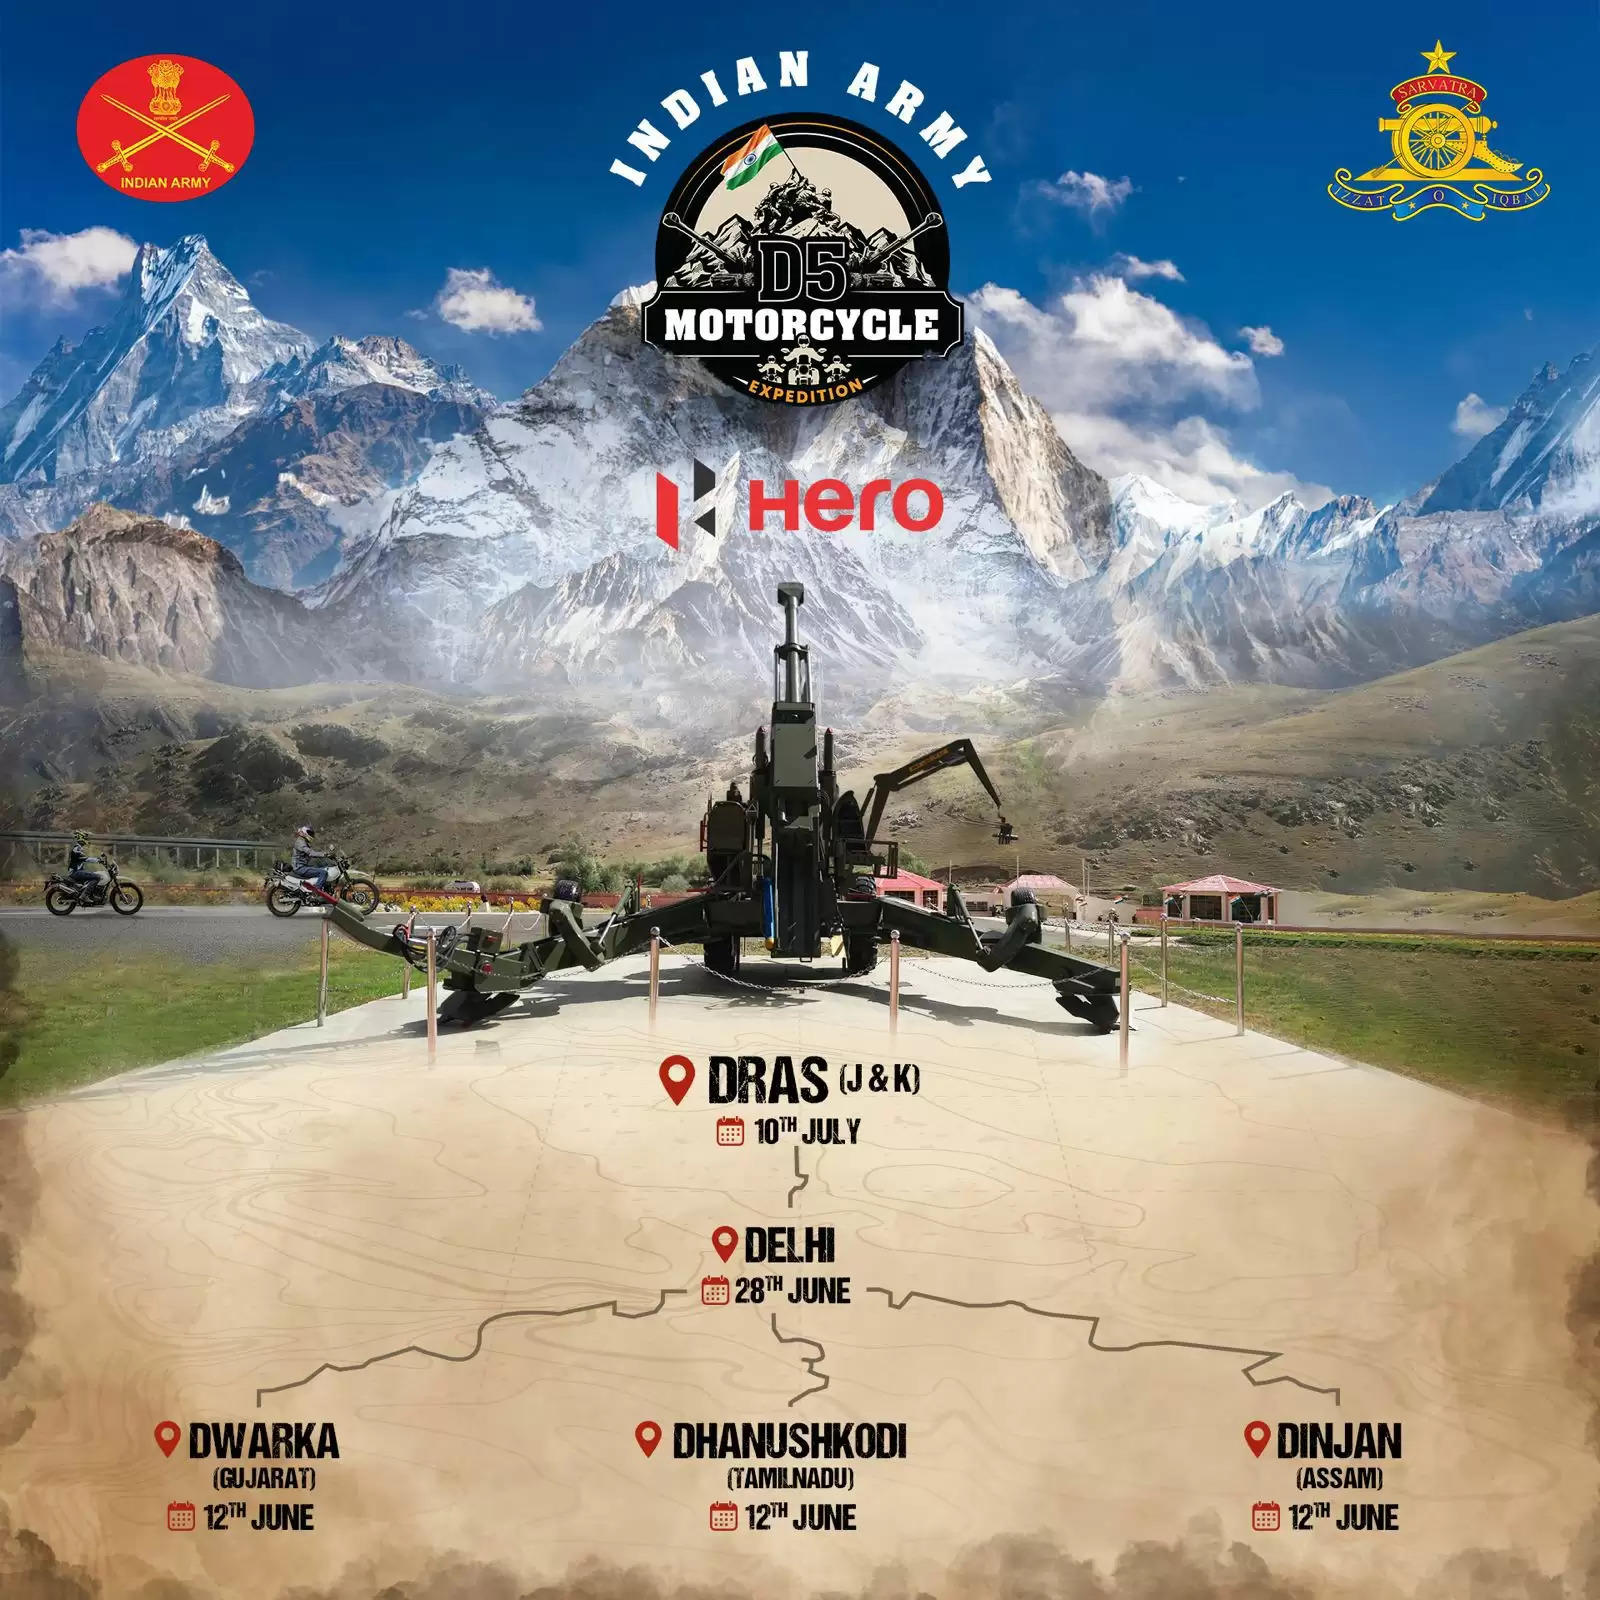 Indian Army has commenced a Pan-India Motorcycle Expedition on 12 June. This journey is commemorating the 25th anniversary of Indian victory over Pakistan in the Kargil War of 1999